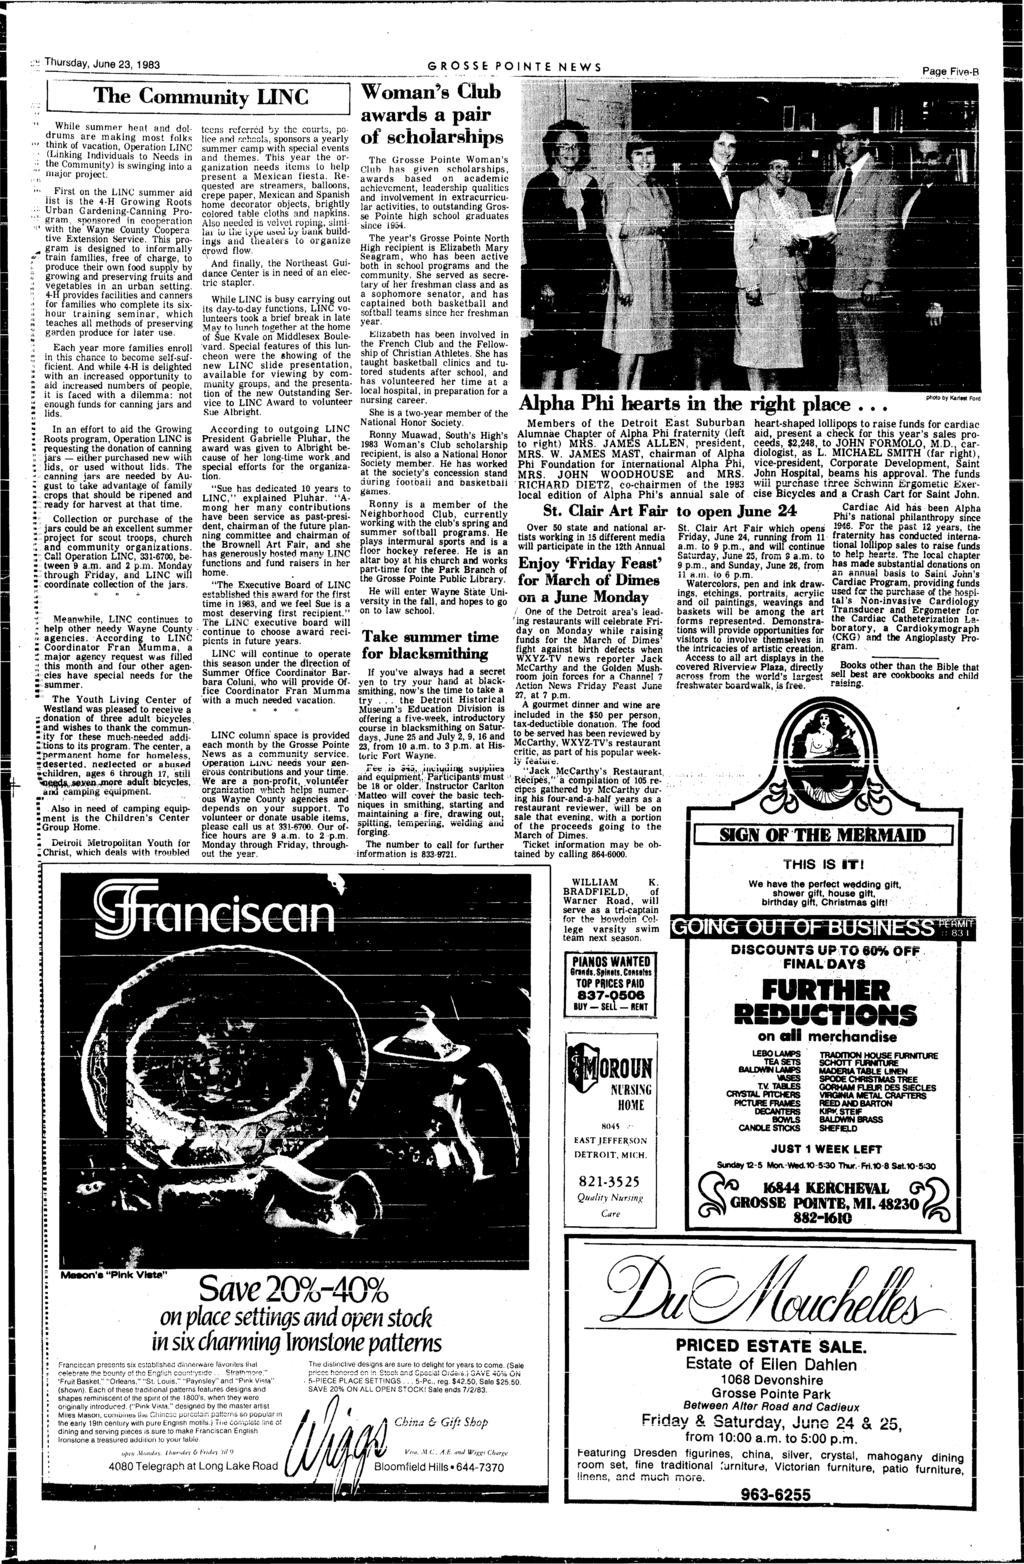 ::' Thursday, June 23, 1983 GROSSE PONTE NEWS W > > < A Whle summer heat and doldrums are makng most folks thnk of vacaton, Operaton LNC (Lnkng ndvduals to Needs n the Communty) s swngng nto a major